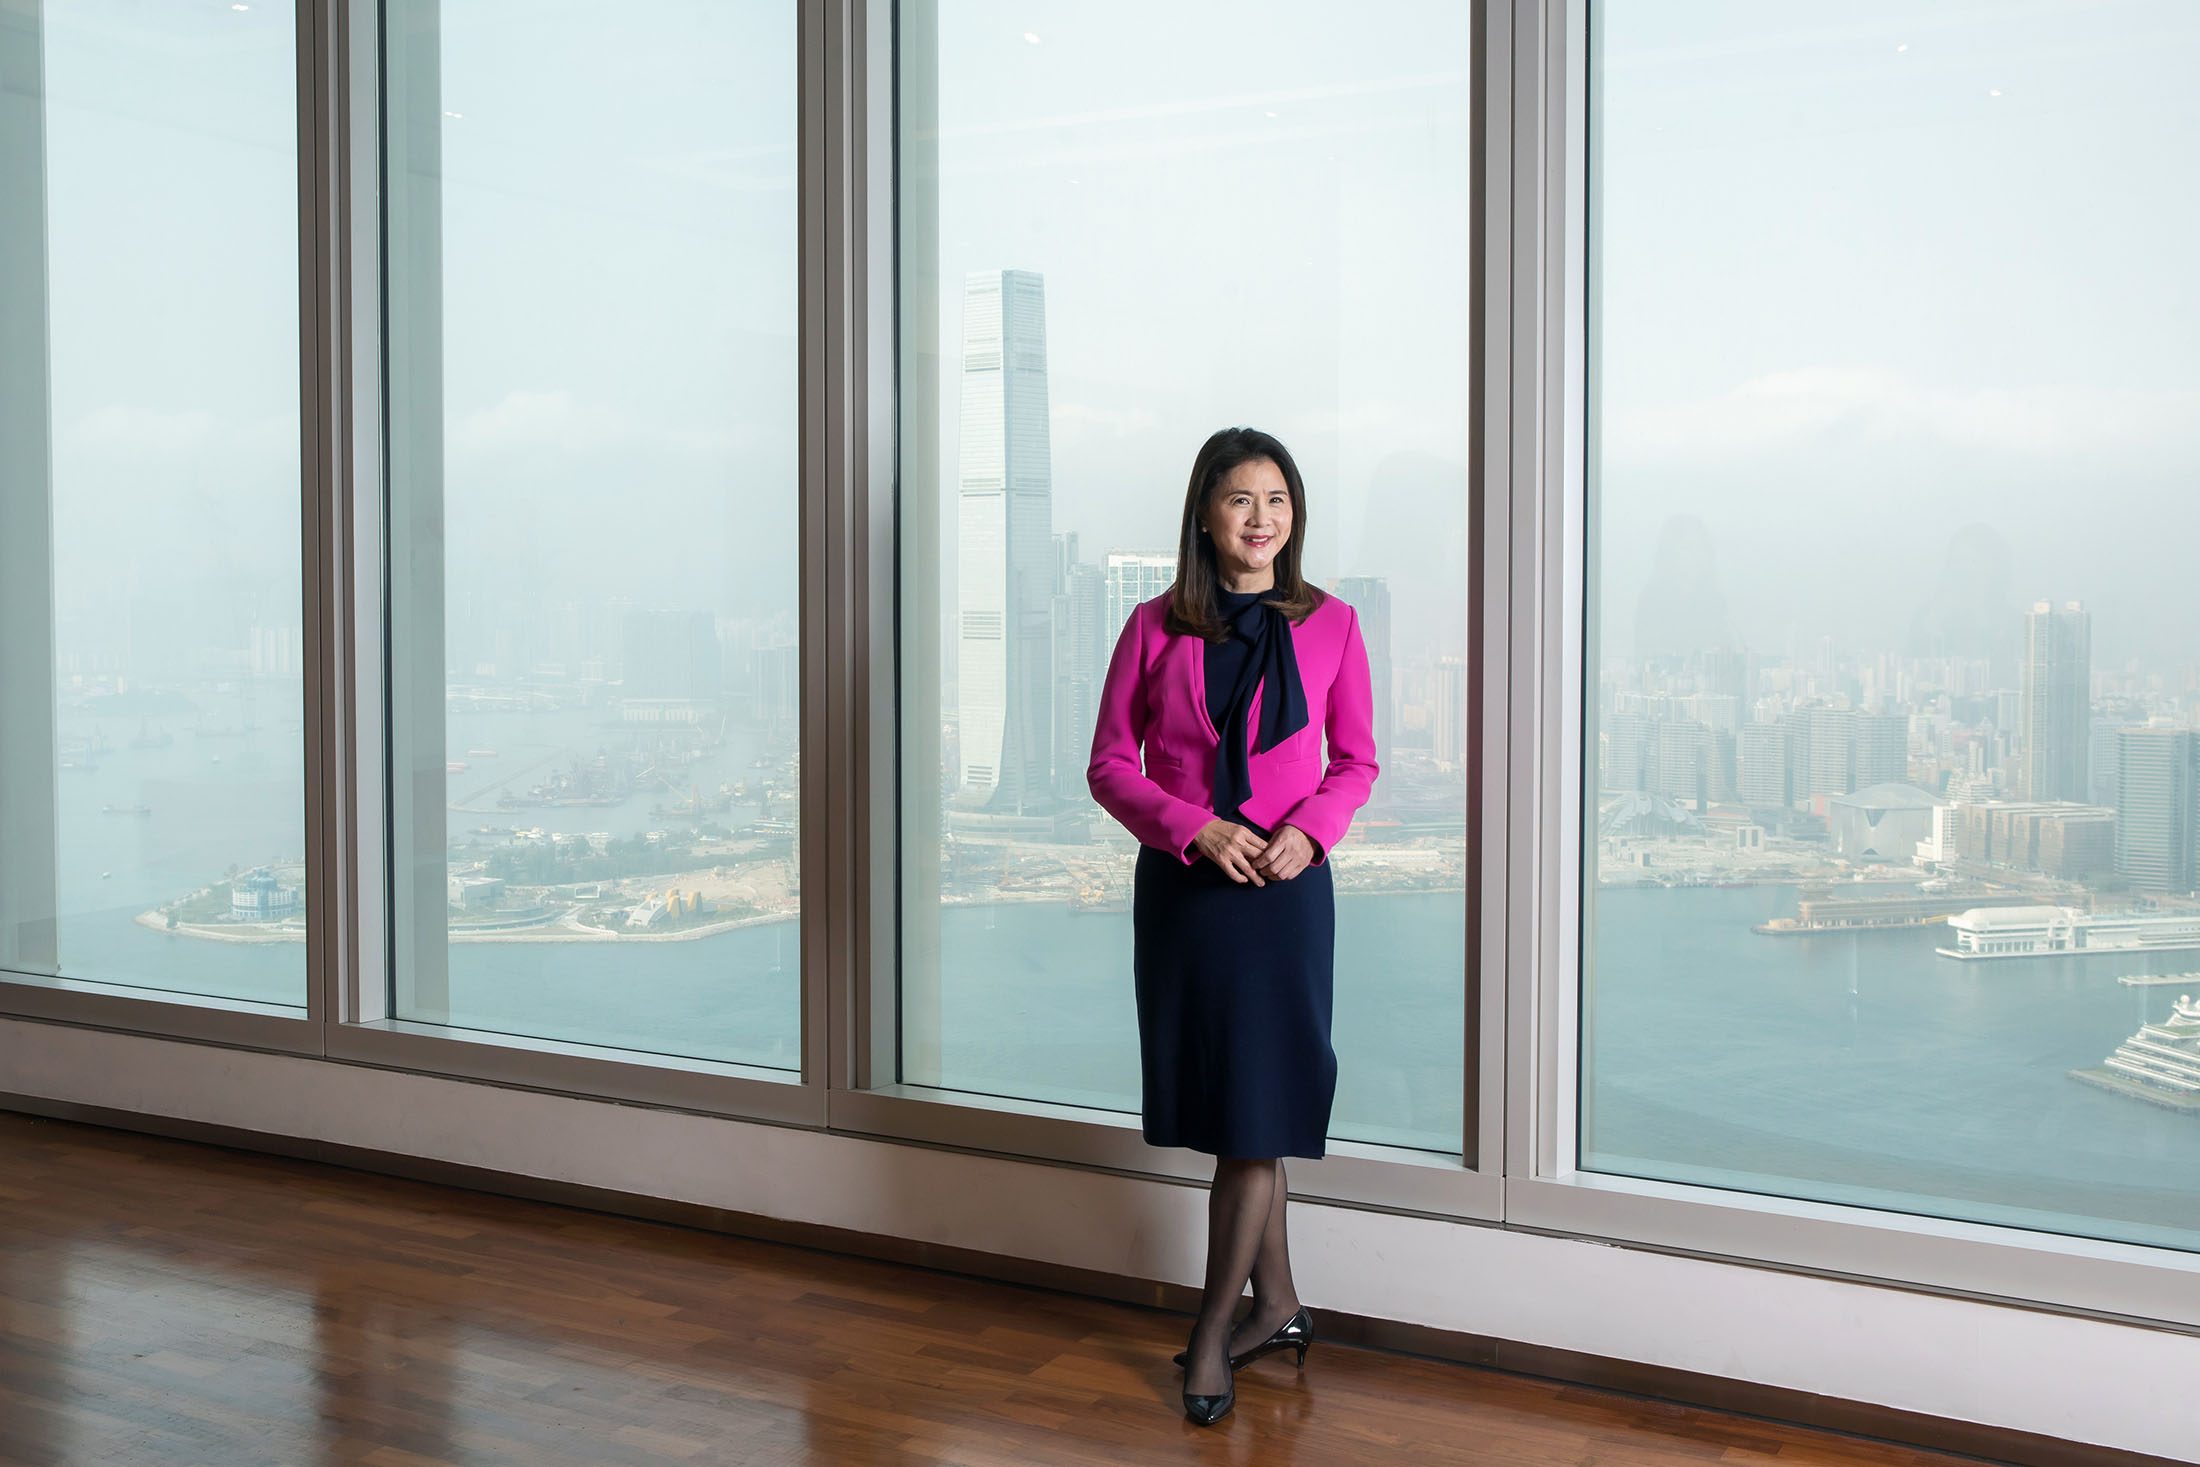 Hong Kong sees more and more women holding top jobs in private banking